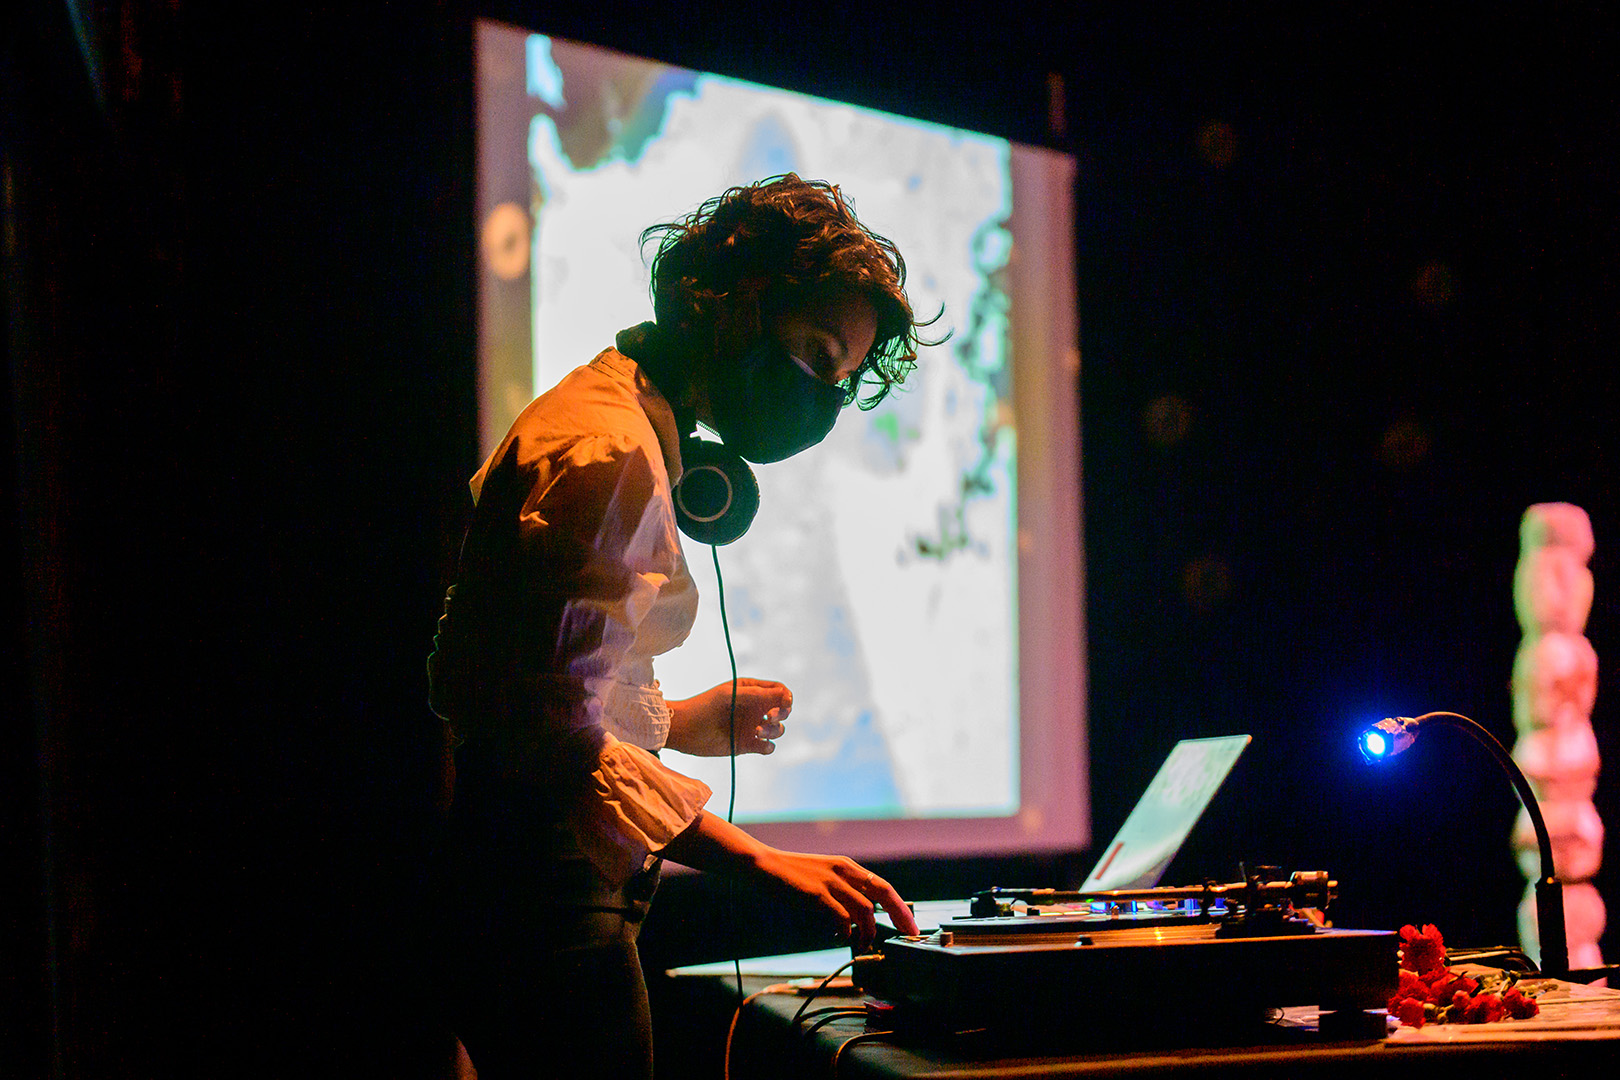 A person with short hair stands in front of a laptop and DJ setup. They are wearing a white blouse, headphones, and a face mask. In the background a screen with a projection on it is out of focus.